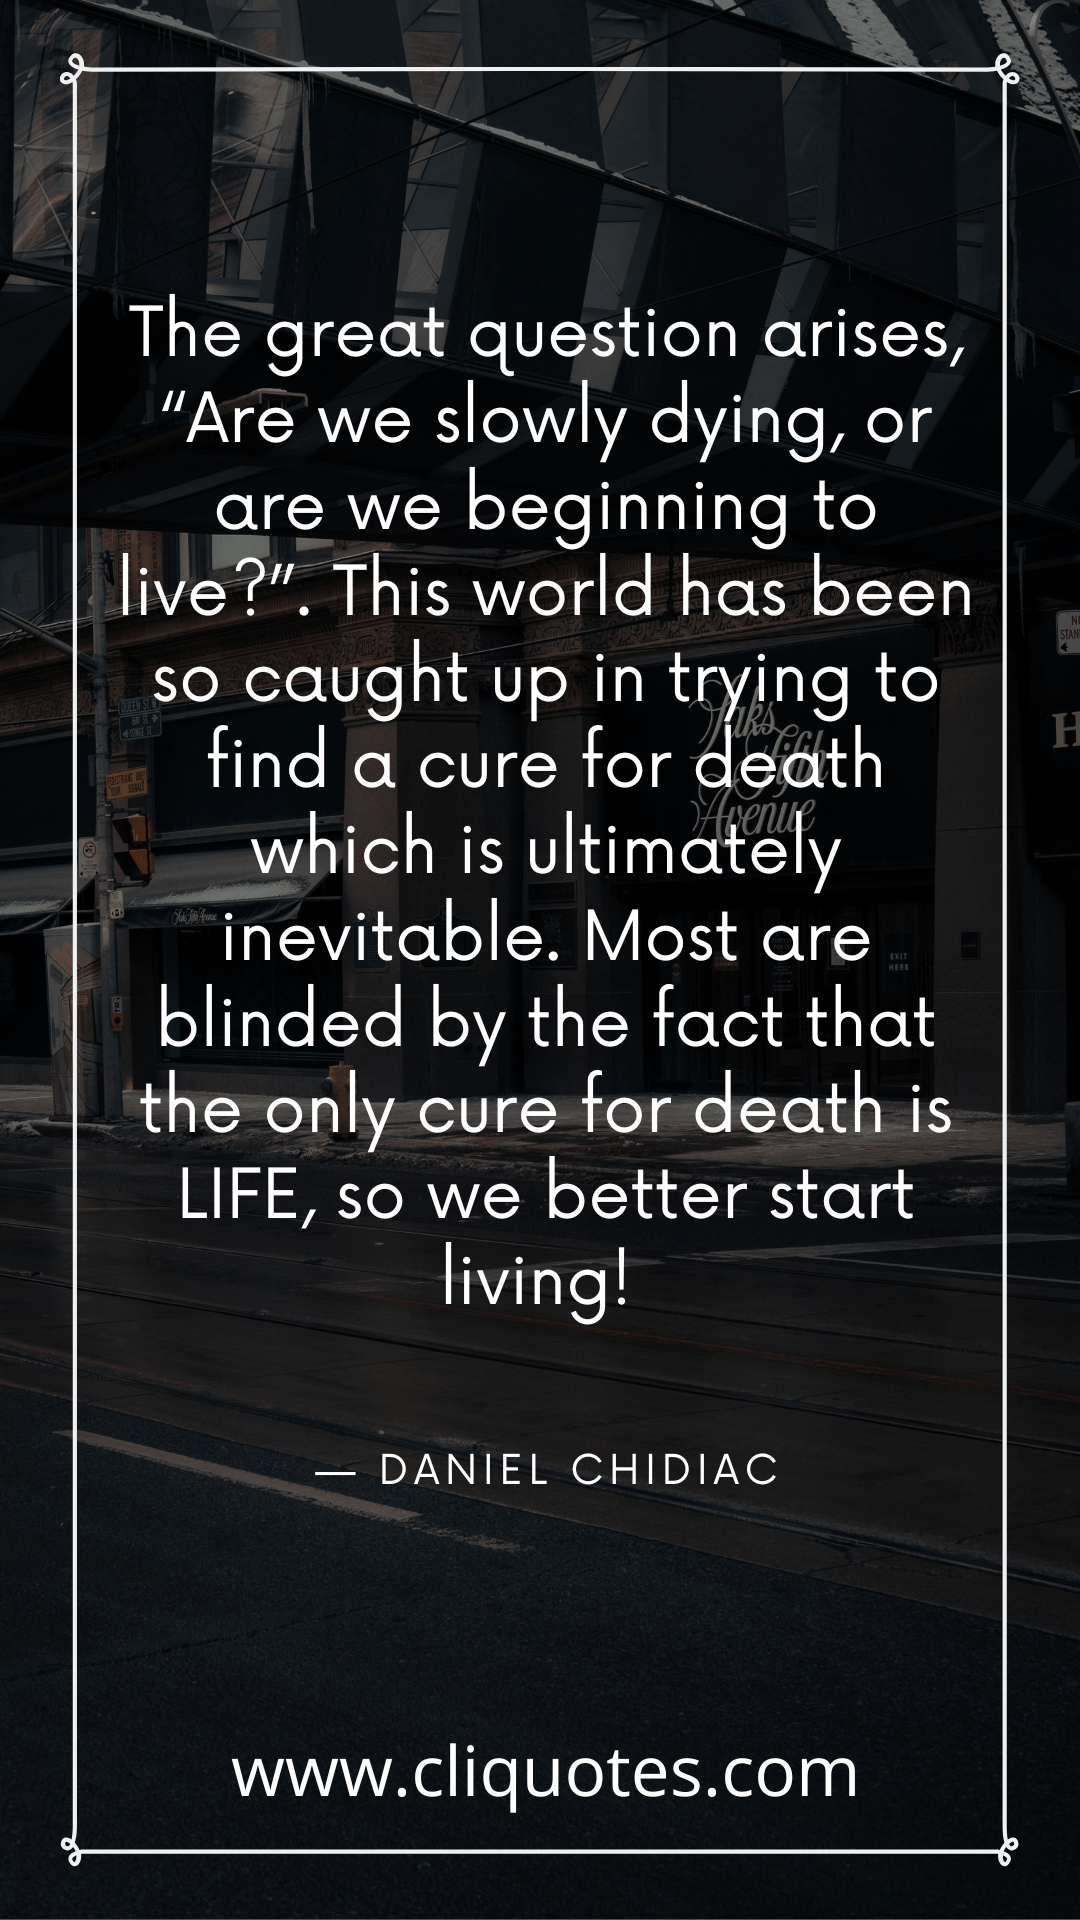 The great question arises, “Are we slowly dying, or are we beginning to live?”. This world has been so caught up in trying to find a cure for death which is ultimately inevitable. Most are blinded by the fact that the only cure for death is LIFE, so we better start living! — DANIEL CHIDIAC